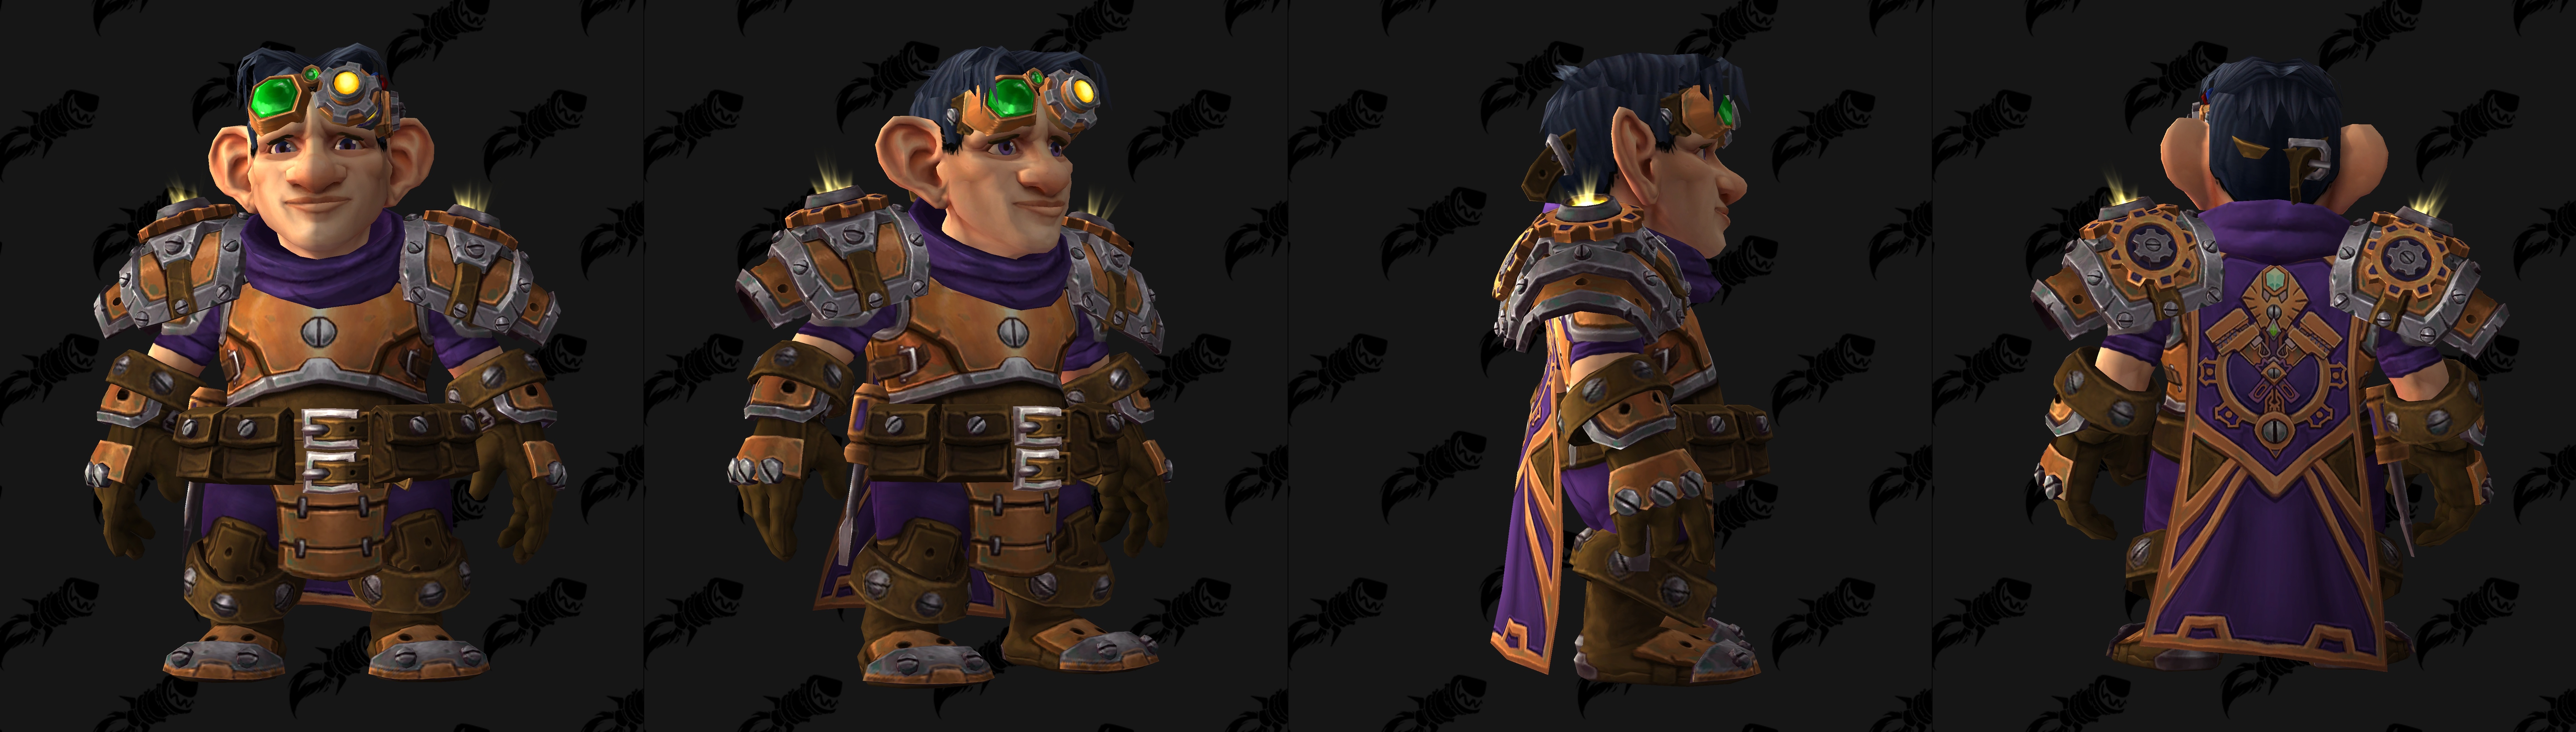 New Allied Races Coming in Battle for Azeroth Expansion with Heritage Armor  Sets - Wowhead News